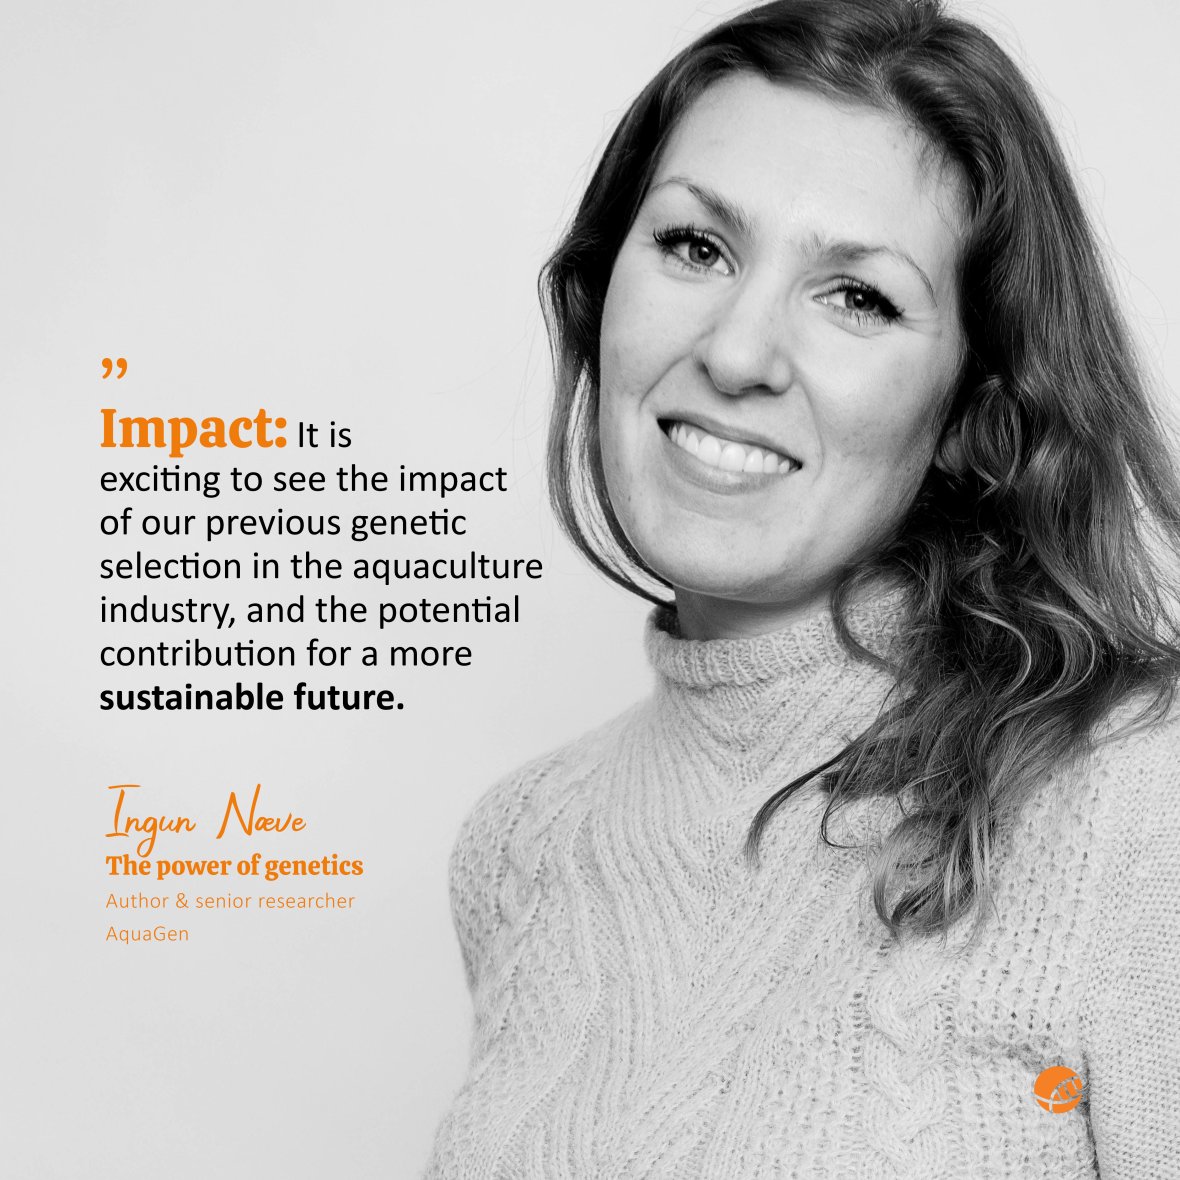 "Impact: It is exciting to see the impact of our previous genetic selection in the aquaculture industry, and the potential contribution for a more sustainable future.